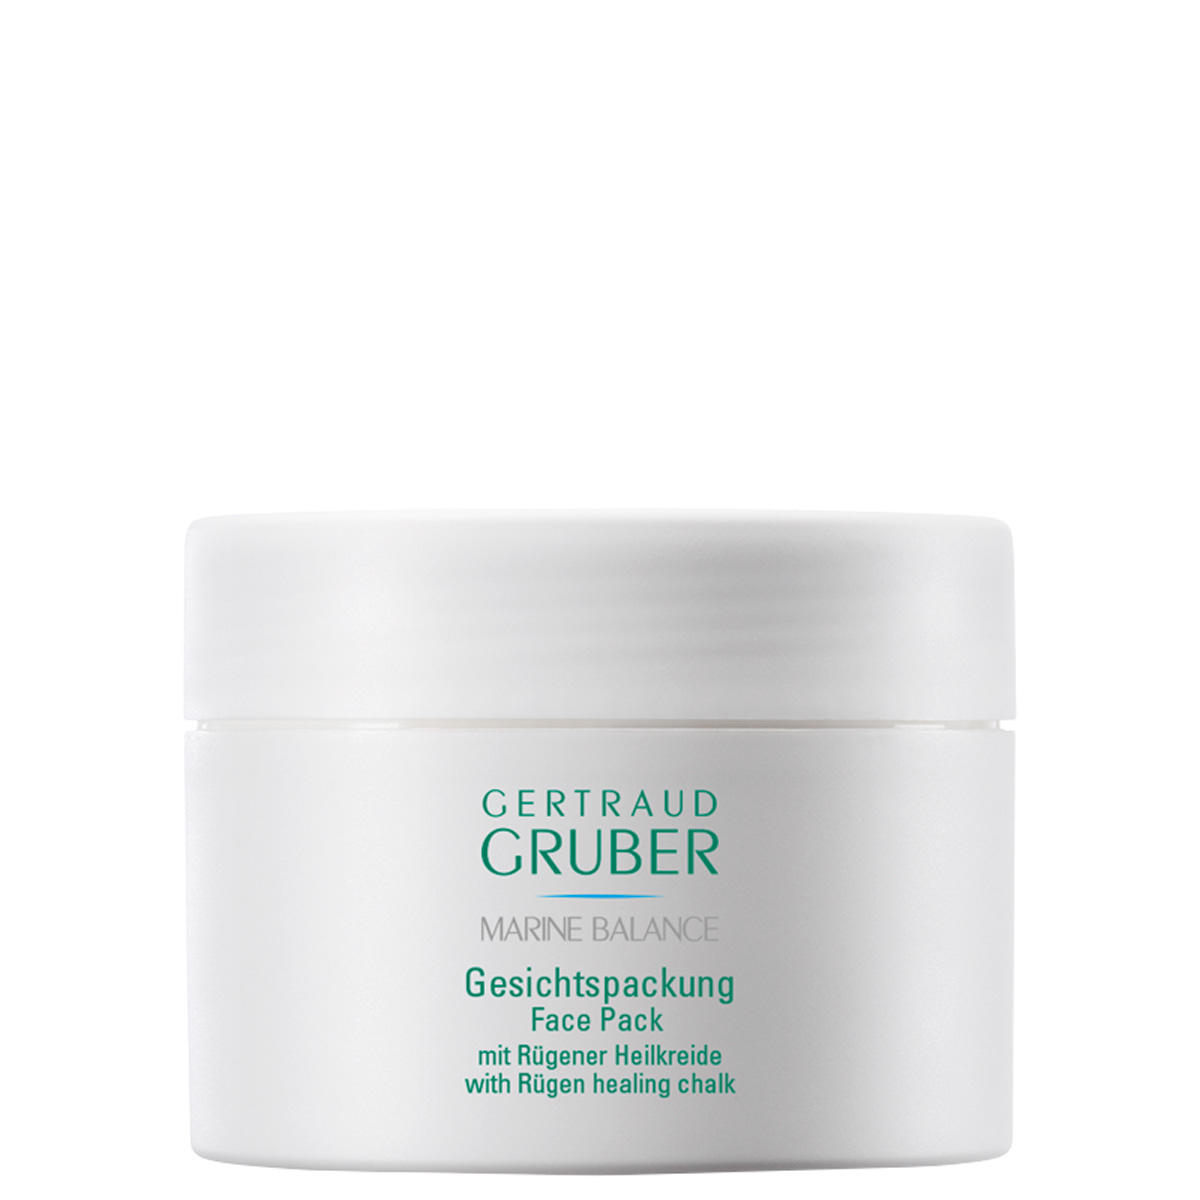 GERTRAUD GRUBER Face pack 40 g - 1